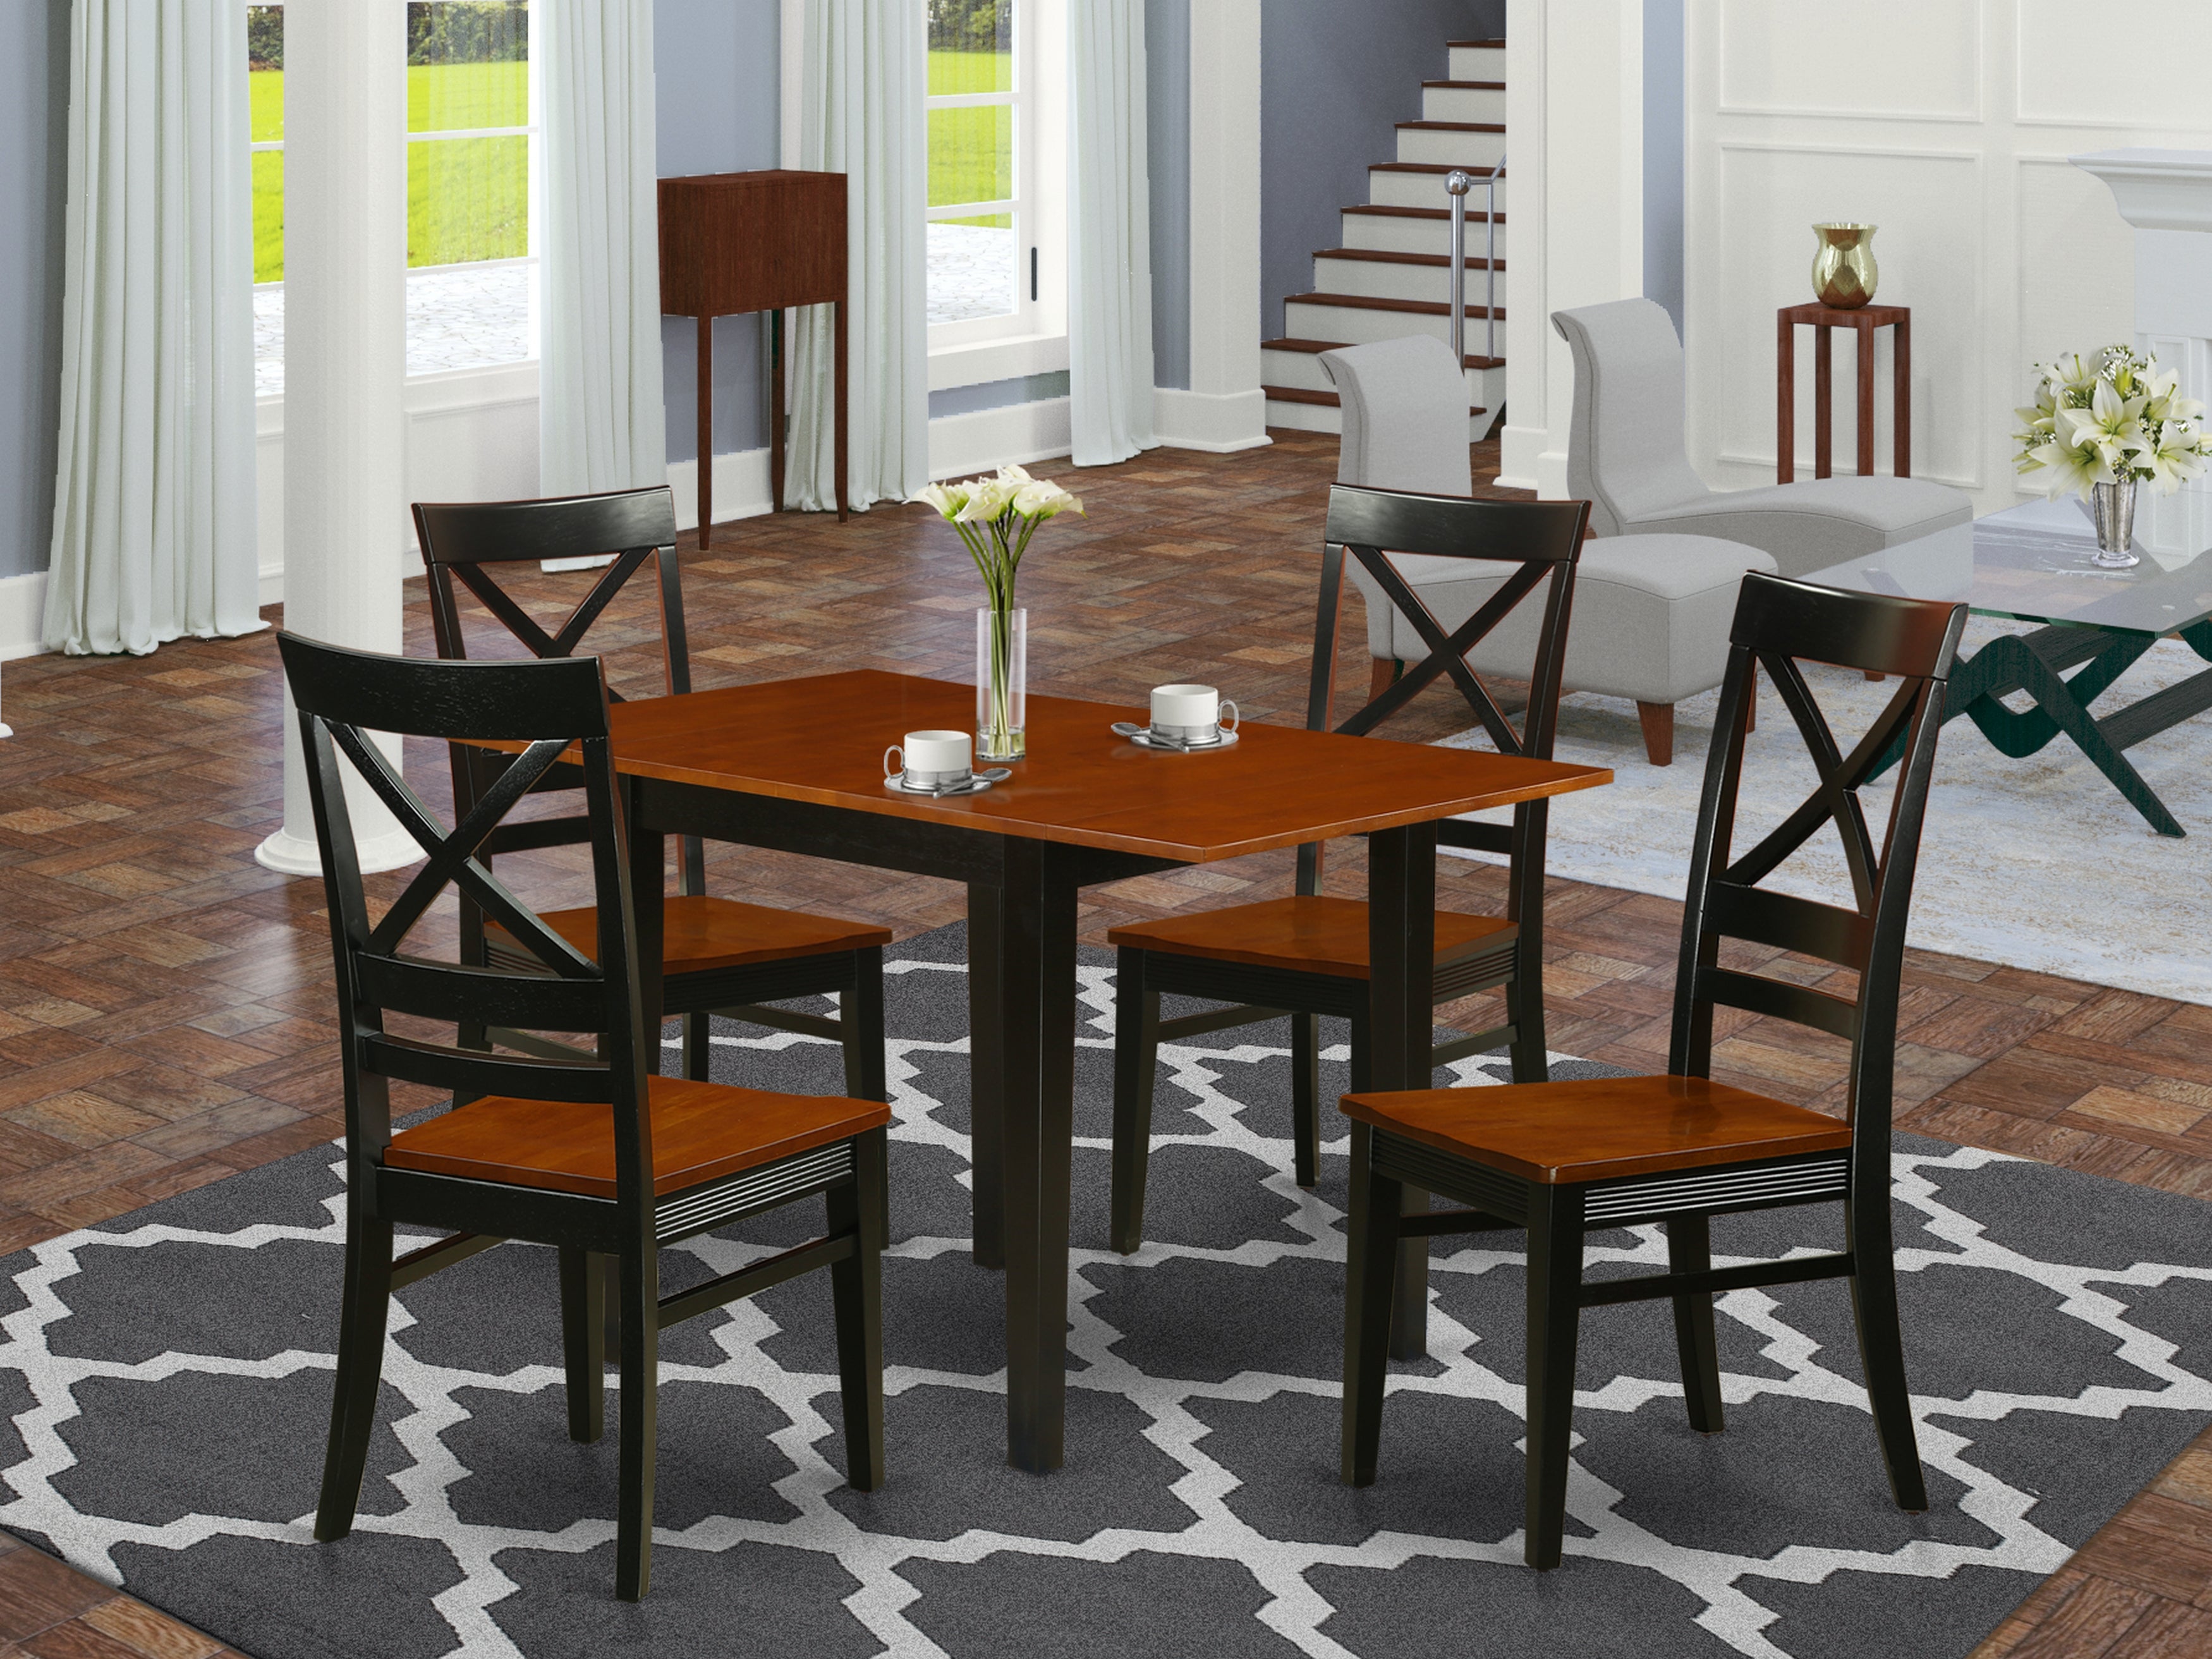 East West Furniture NDQU5-BCH-W, 5Pc Dinette Set for Small Spaces Offers a Wood Dining Table and 4 Dining Chairs with Solid Wood Seat and X Back, Black and Cherry Finish